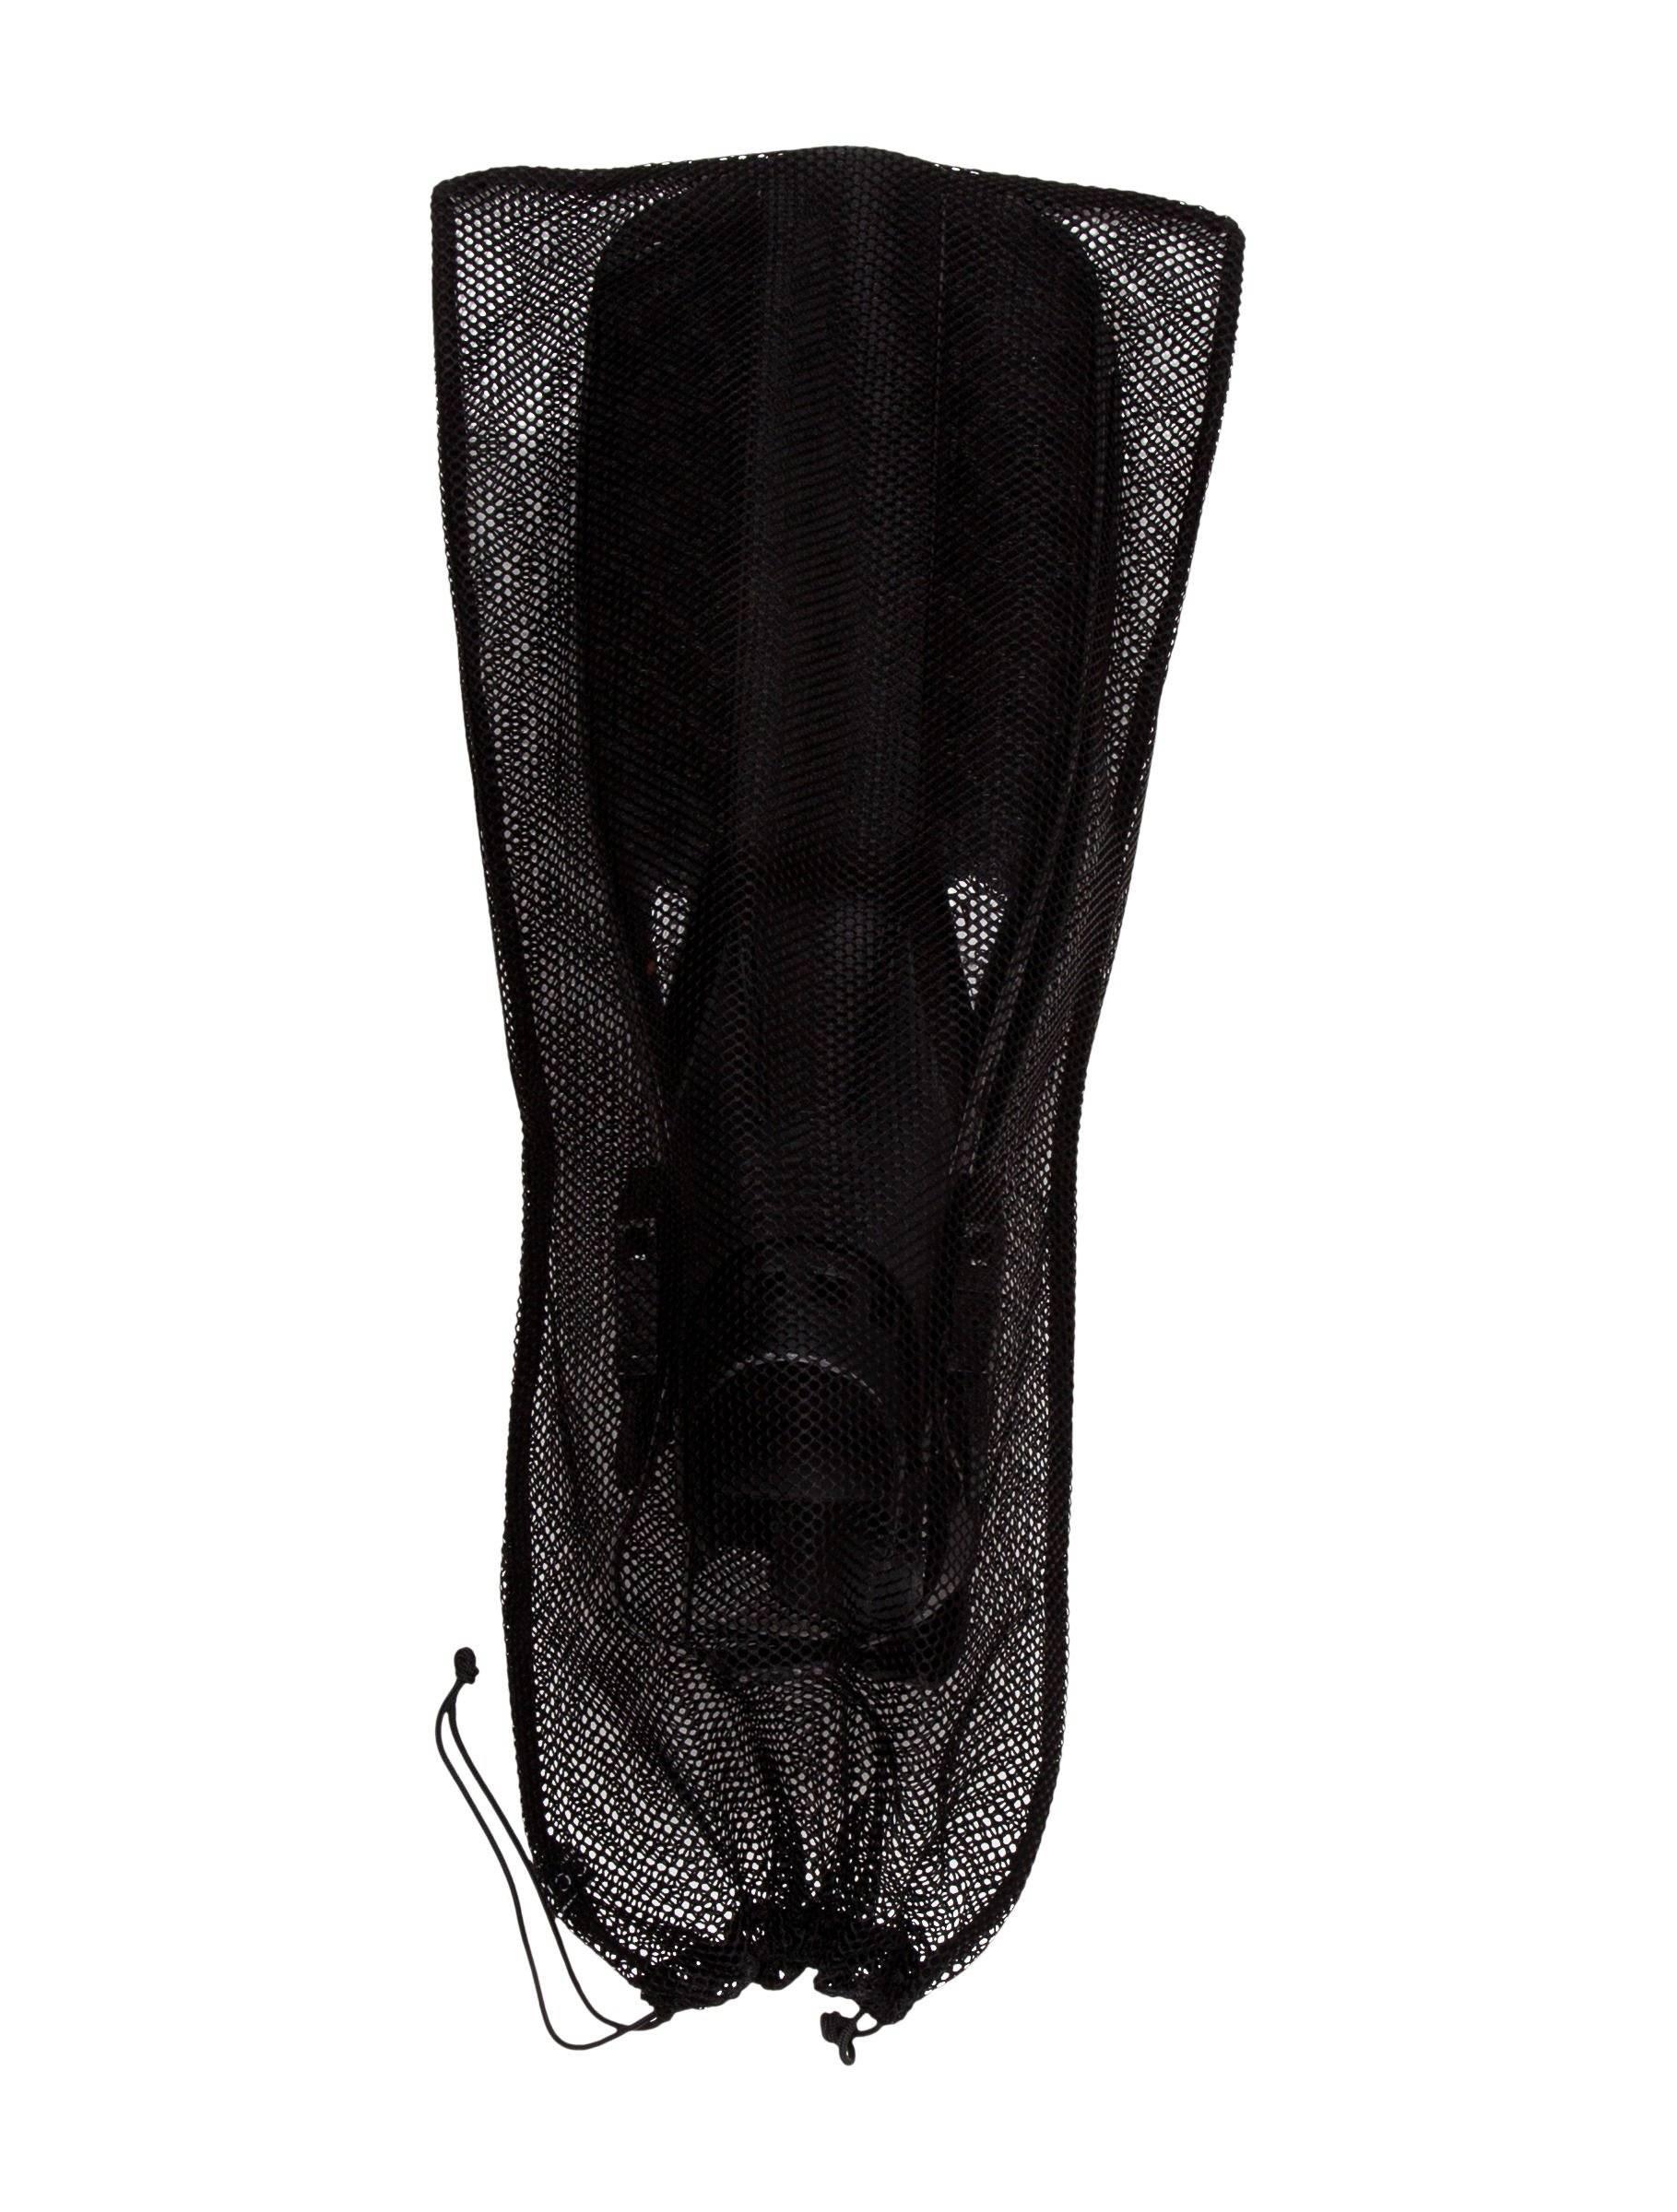 Tom Ford for Gucci Spring/Summer 1999
Limited edition. 

Black Guccissima rubber Gucci snorkelling fins with buckle closures at sides. Includes mesh dust bag.